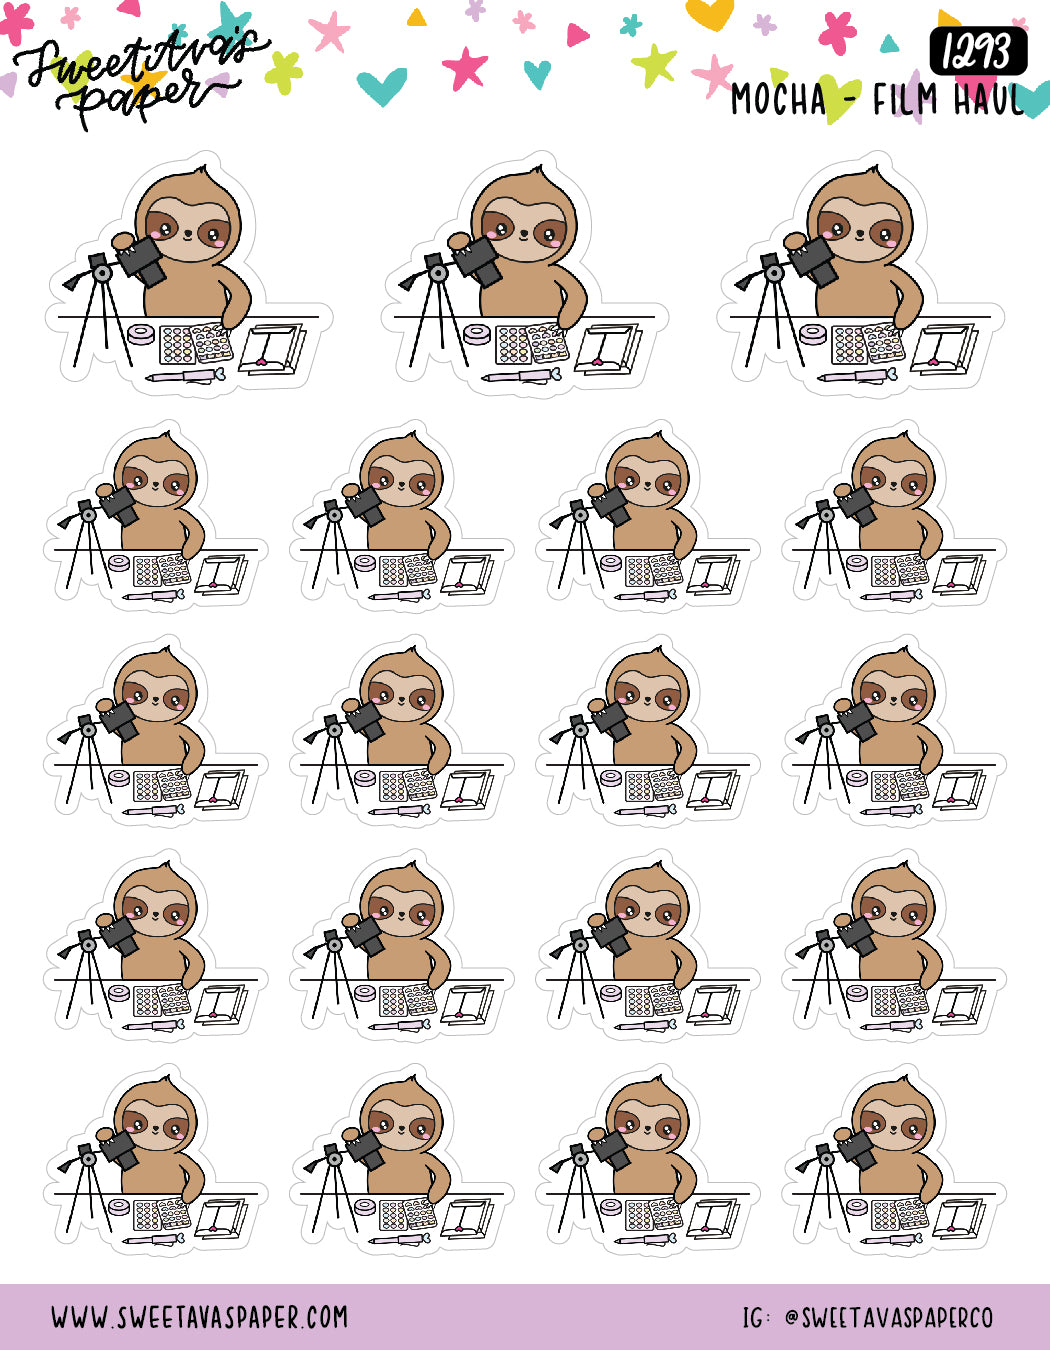 Filming Planner Haul Planner Stickers - Mocha The Sloth [1293]